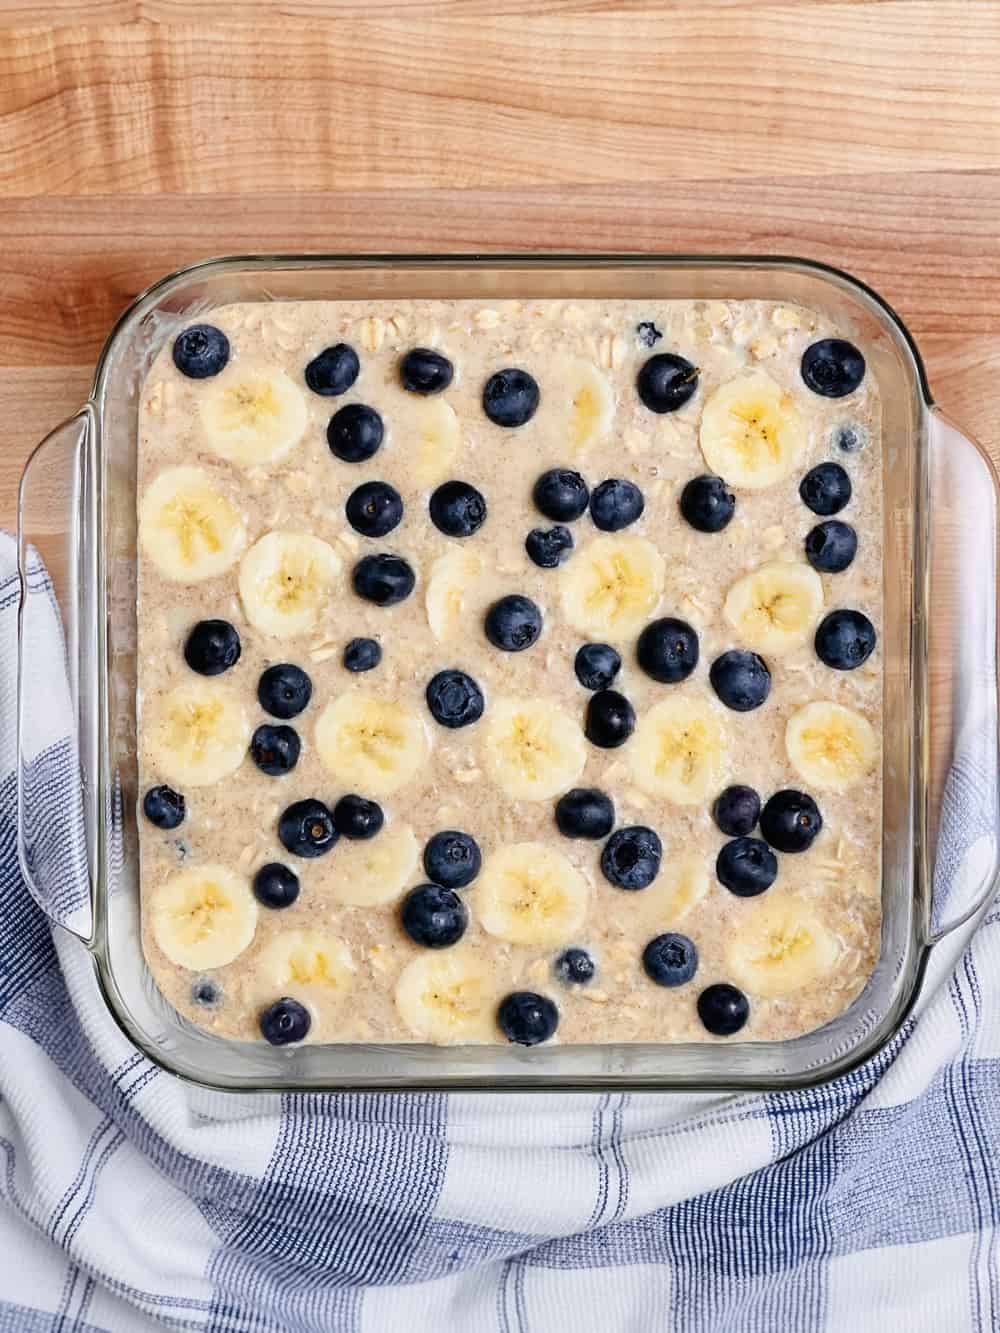 baked oats cake made with blueberries and bananas